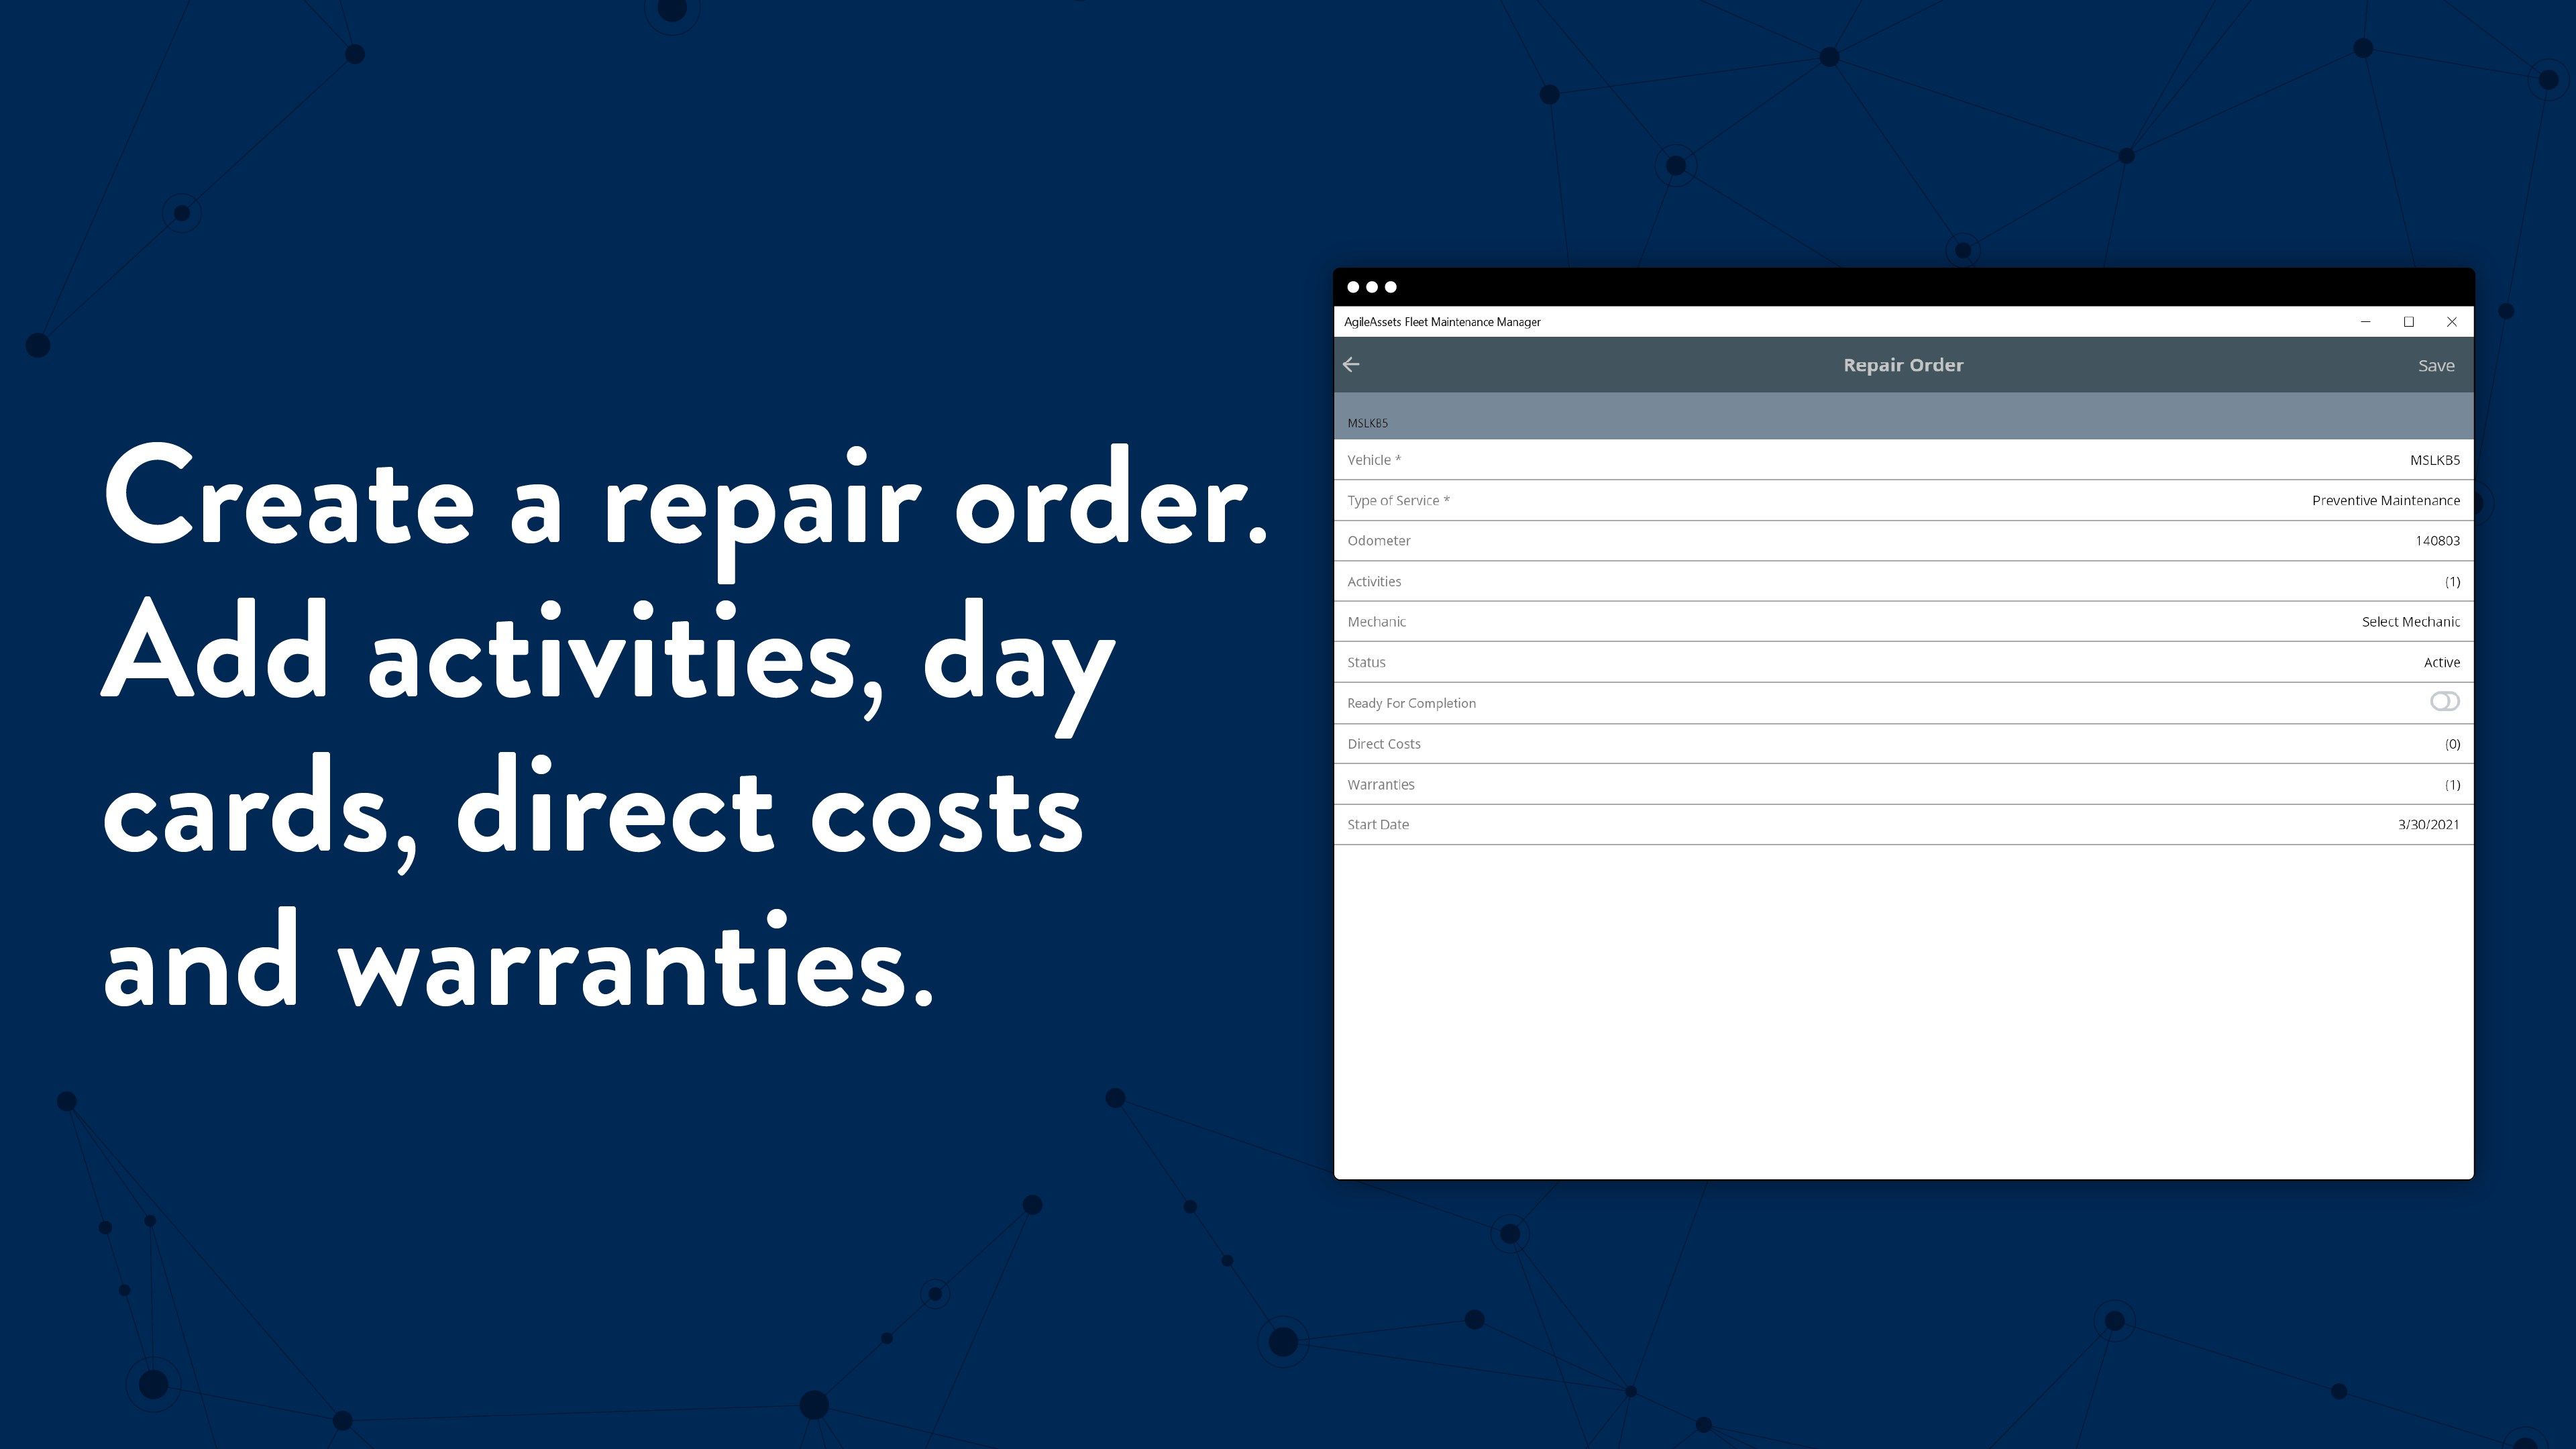 Create a repair order. Add activities, day cards, direct costs and warranties